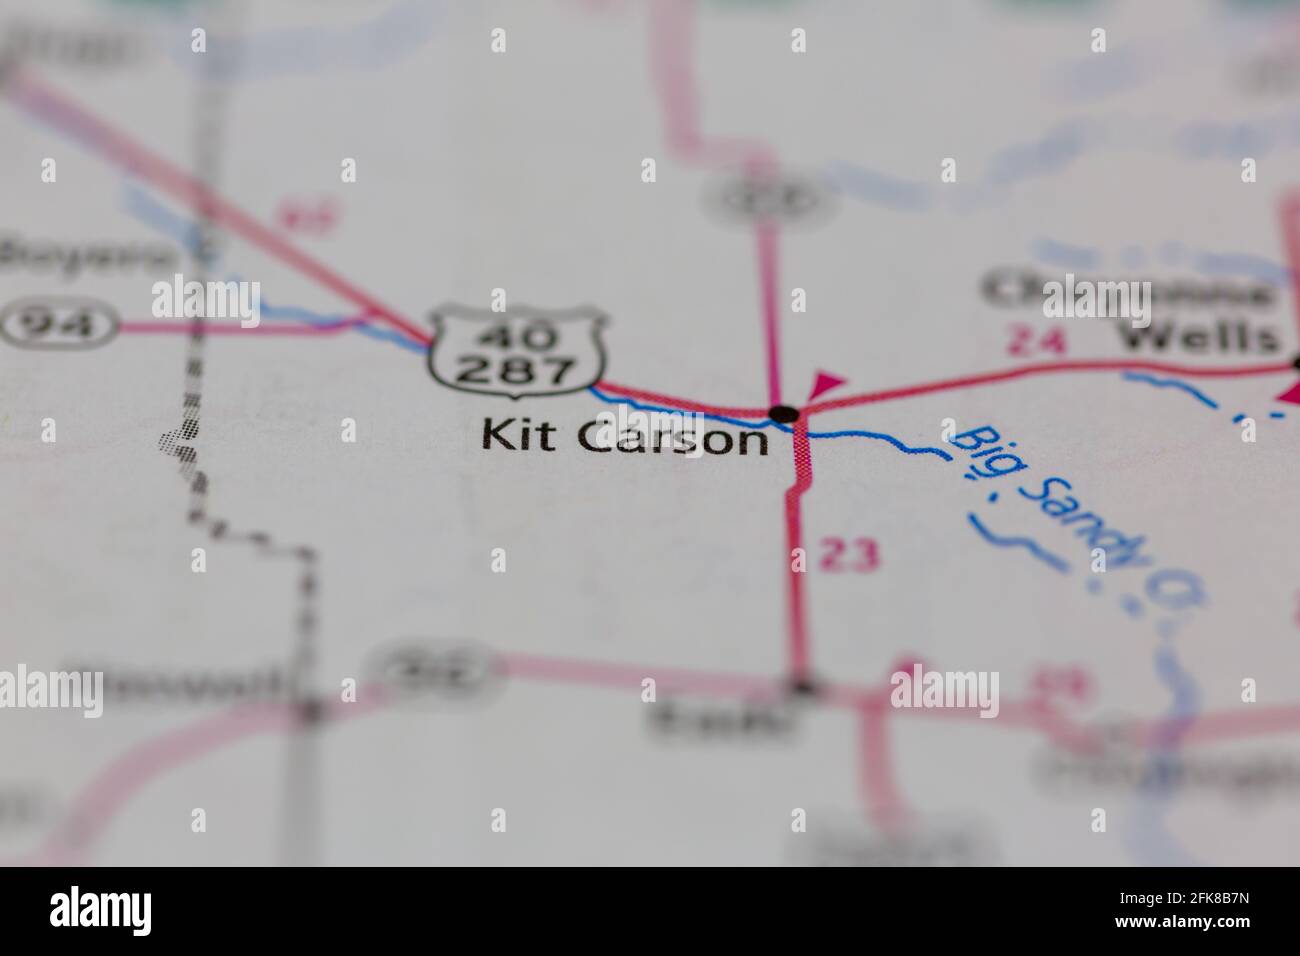 Kit Carson Colorado USA shown on a Geography map or road map Stock Photo